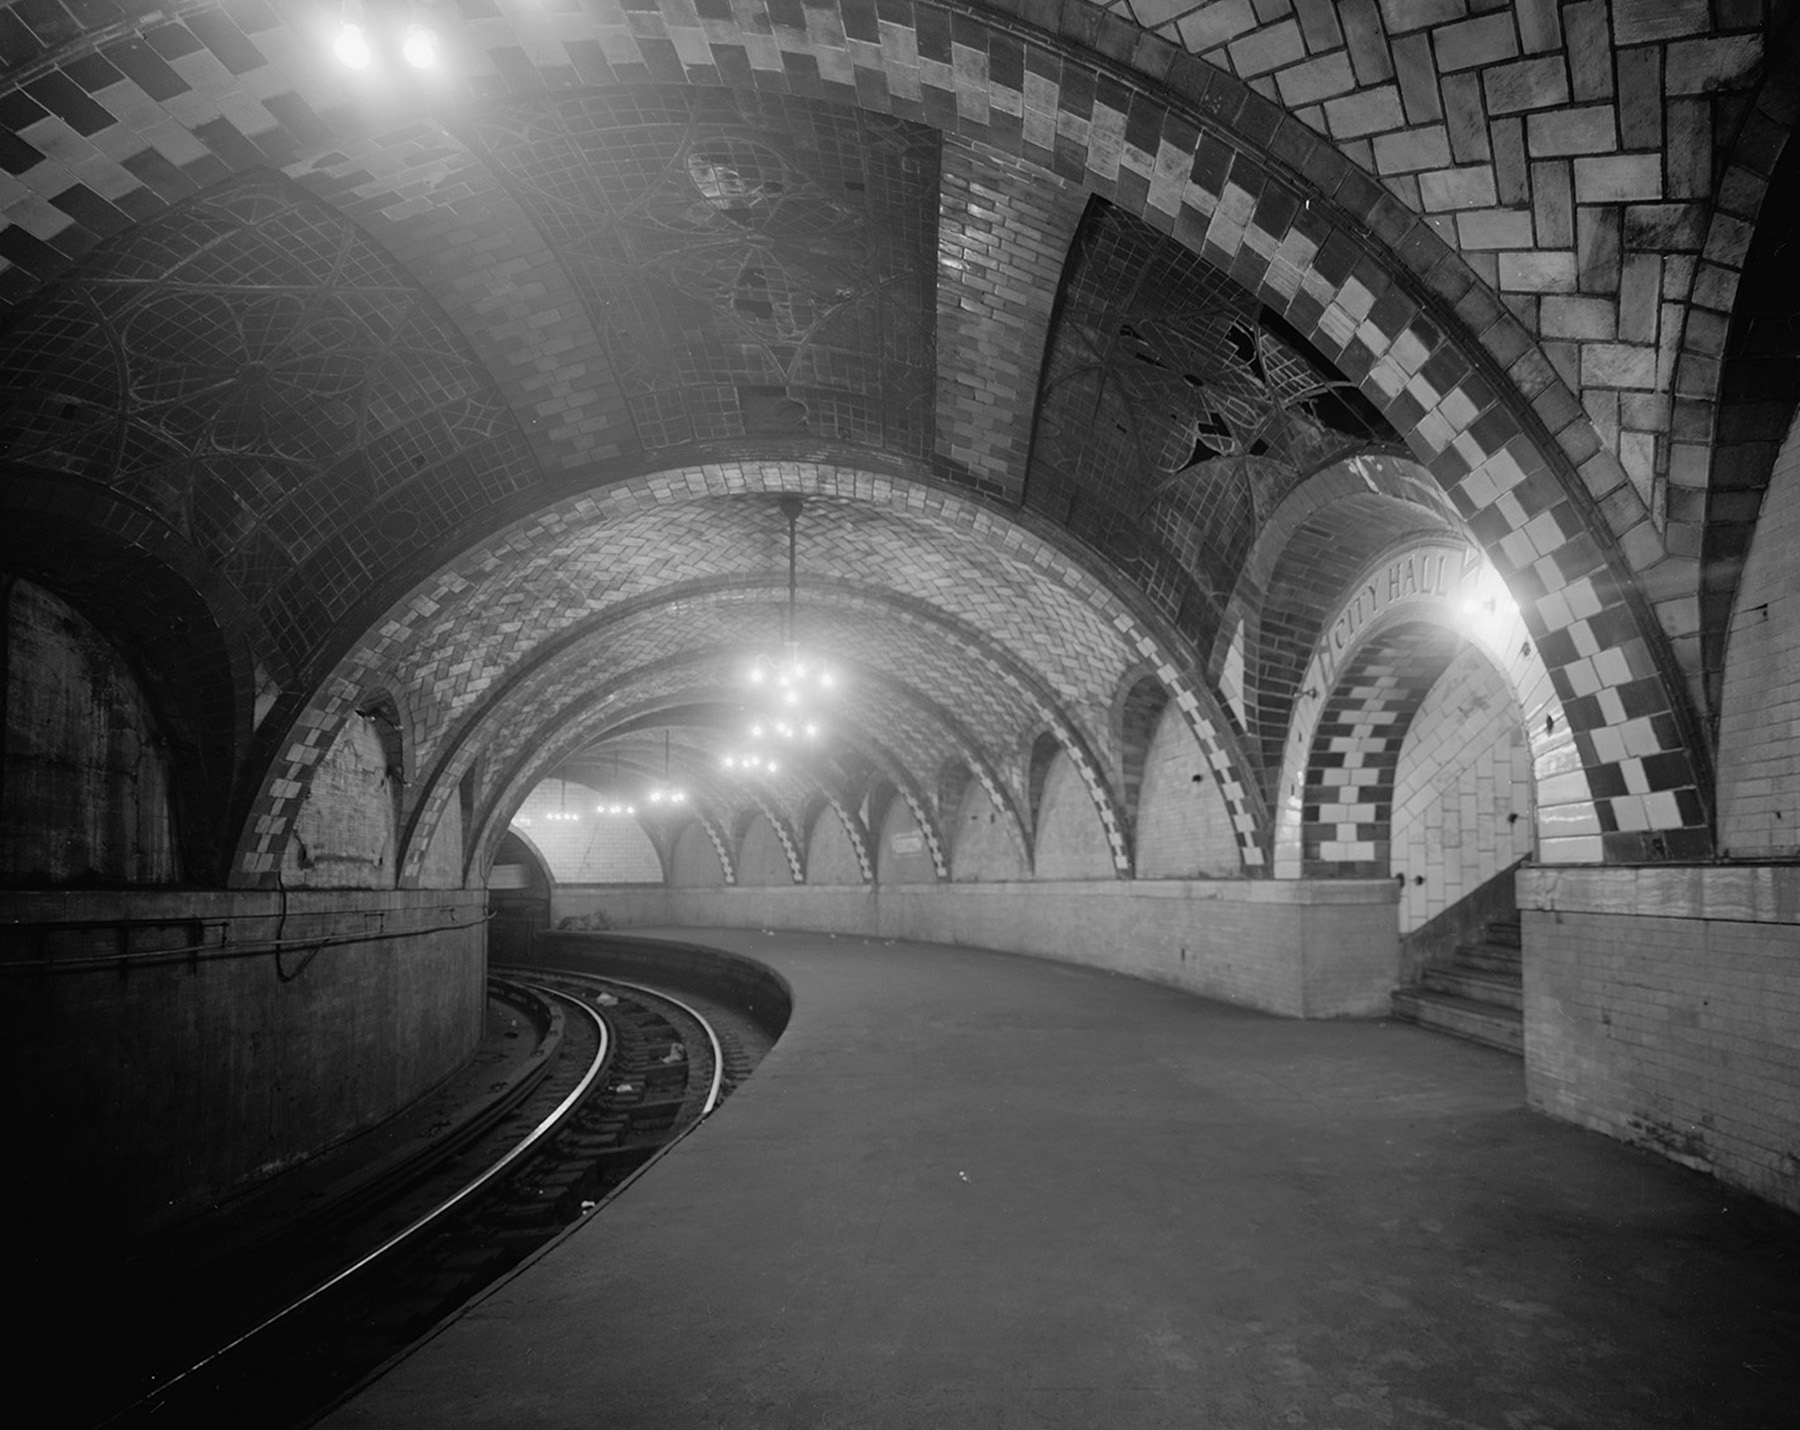 Photograph shows the interior of a subway station—its tracks and decorative ceiling tiles. 